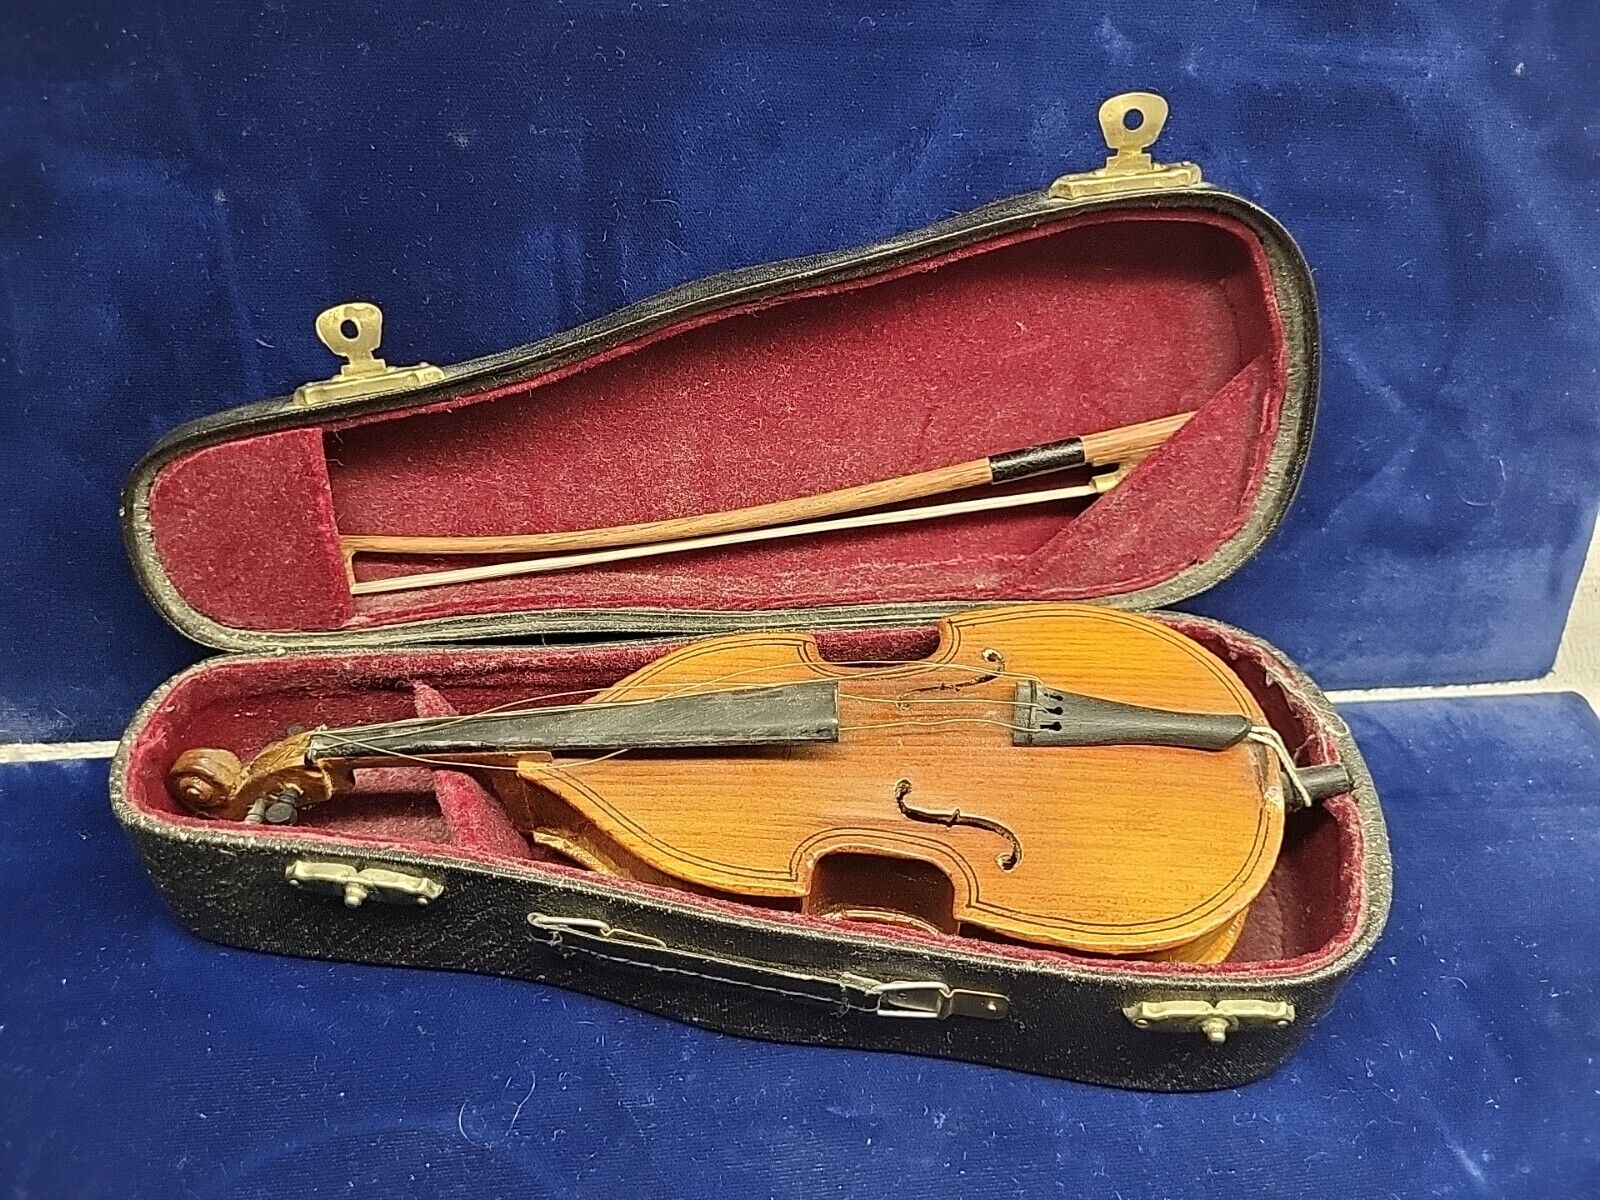 Vintage Miniature Wood Cello Instrument with Bow and Case 7.5 inches